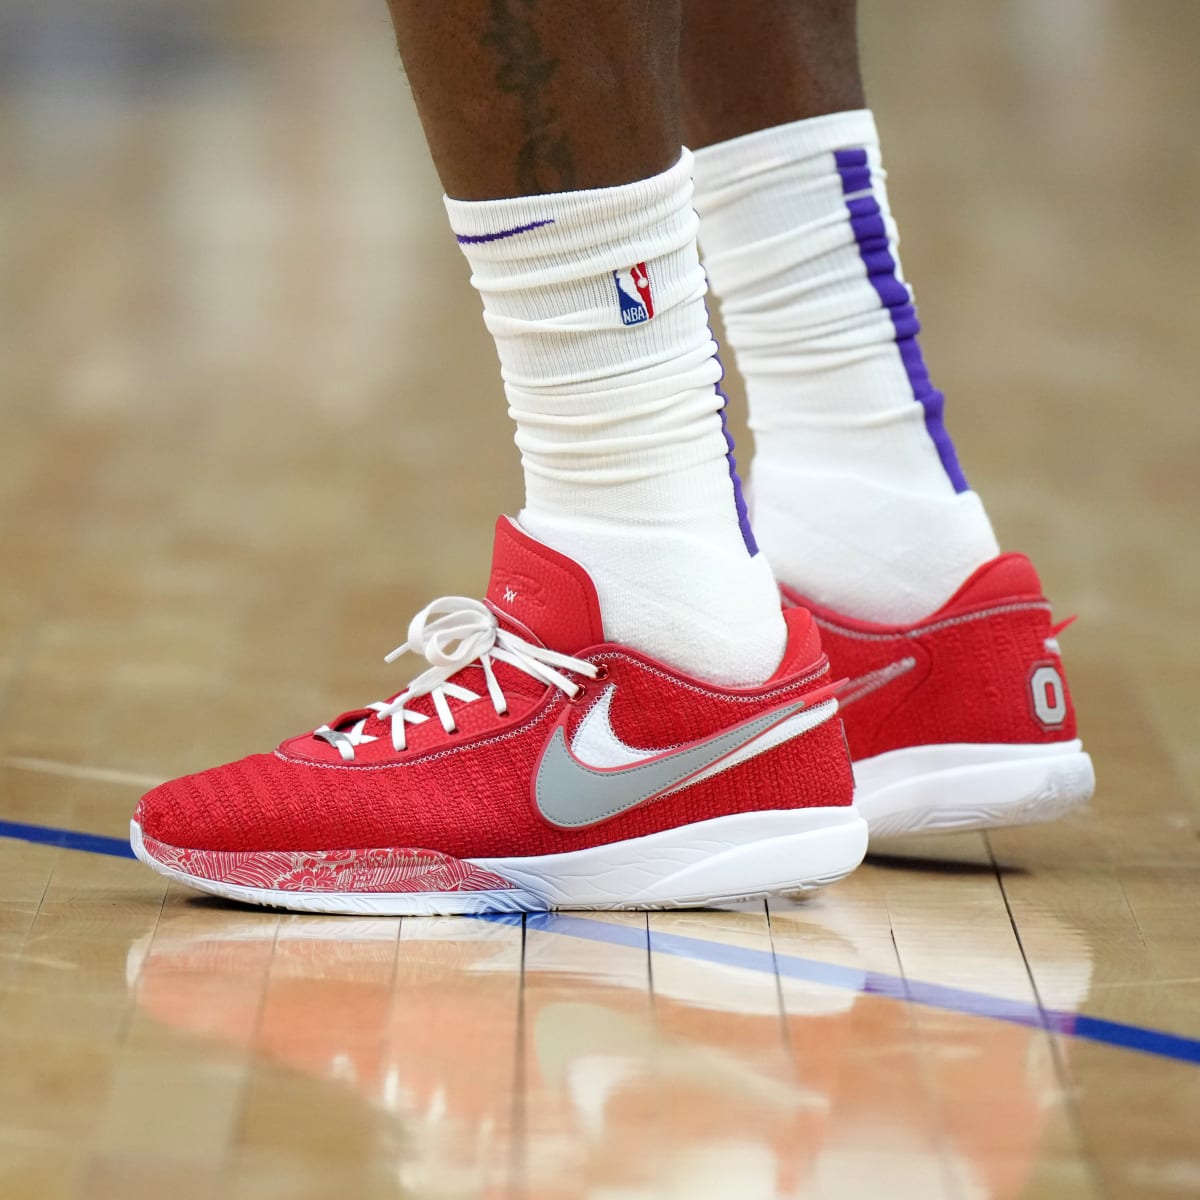 More of Kobe Bryant's Signature Nike Shoes Releasing in 2023 - Sports  Illustrated FanNation Kicks News, Analysis and More